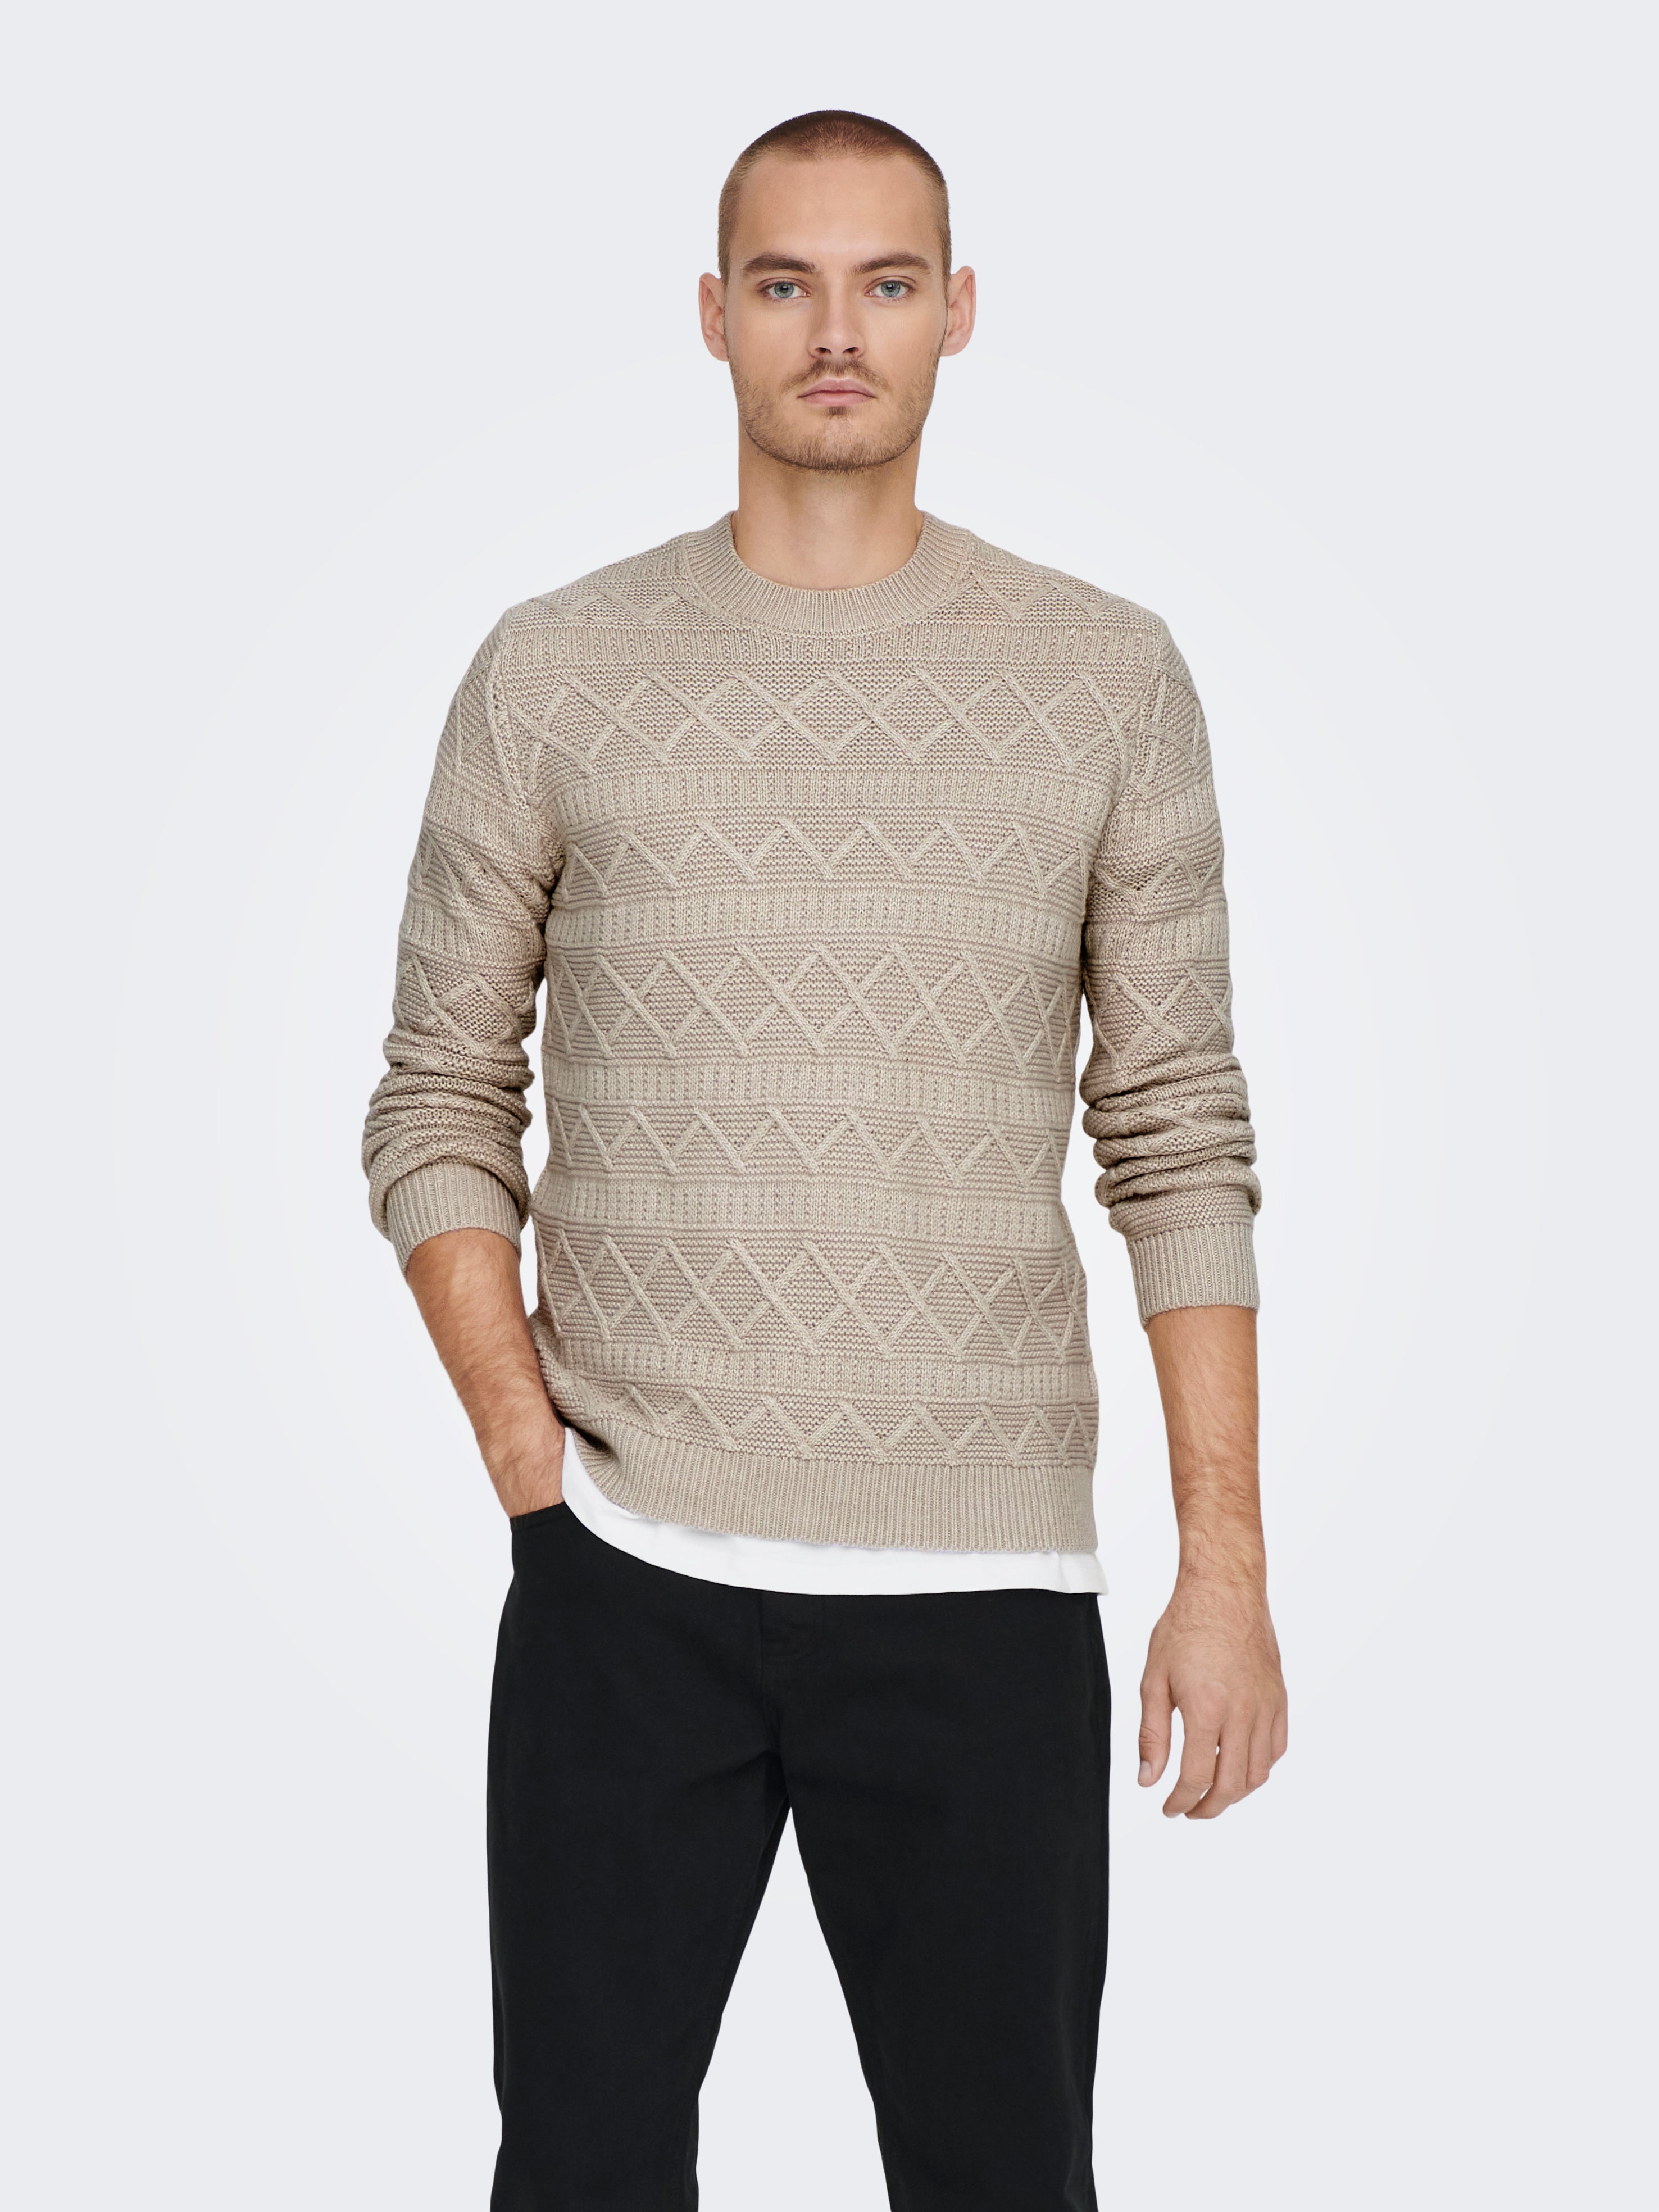 Black L discount 56% MEN FASHION Jumpers & Sweatshirts Knitted ONLY & SONS jumper 